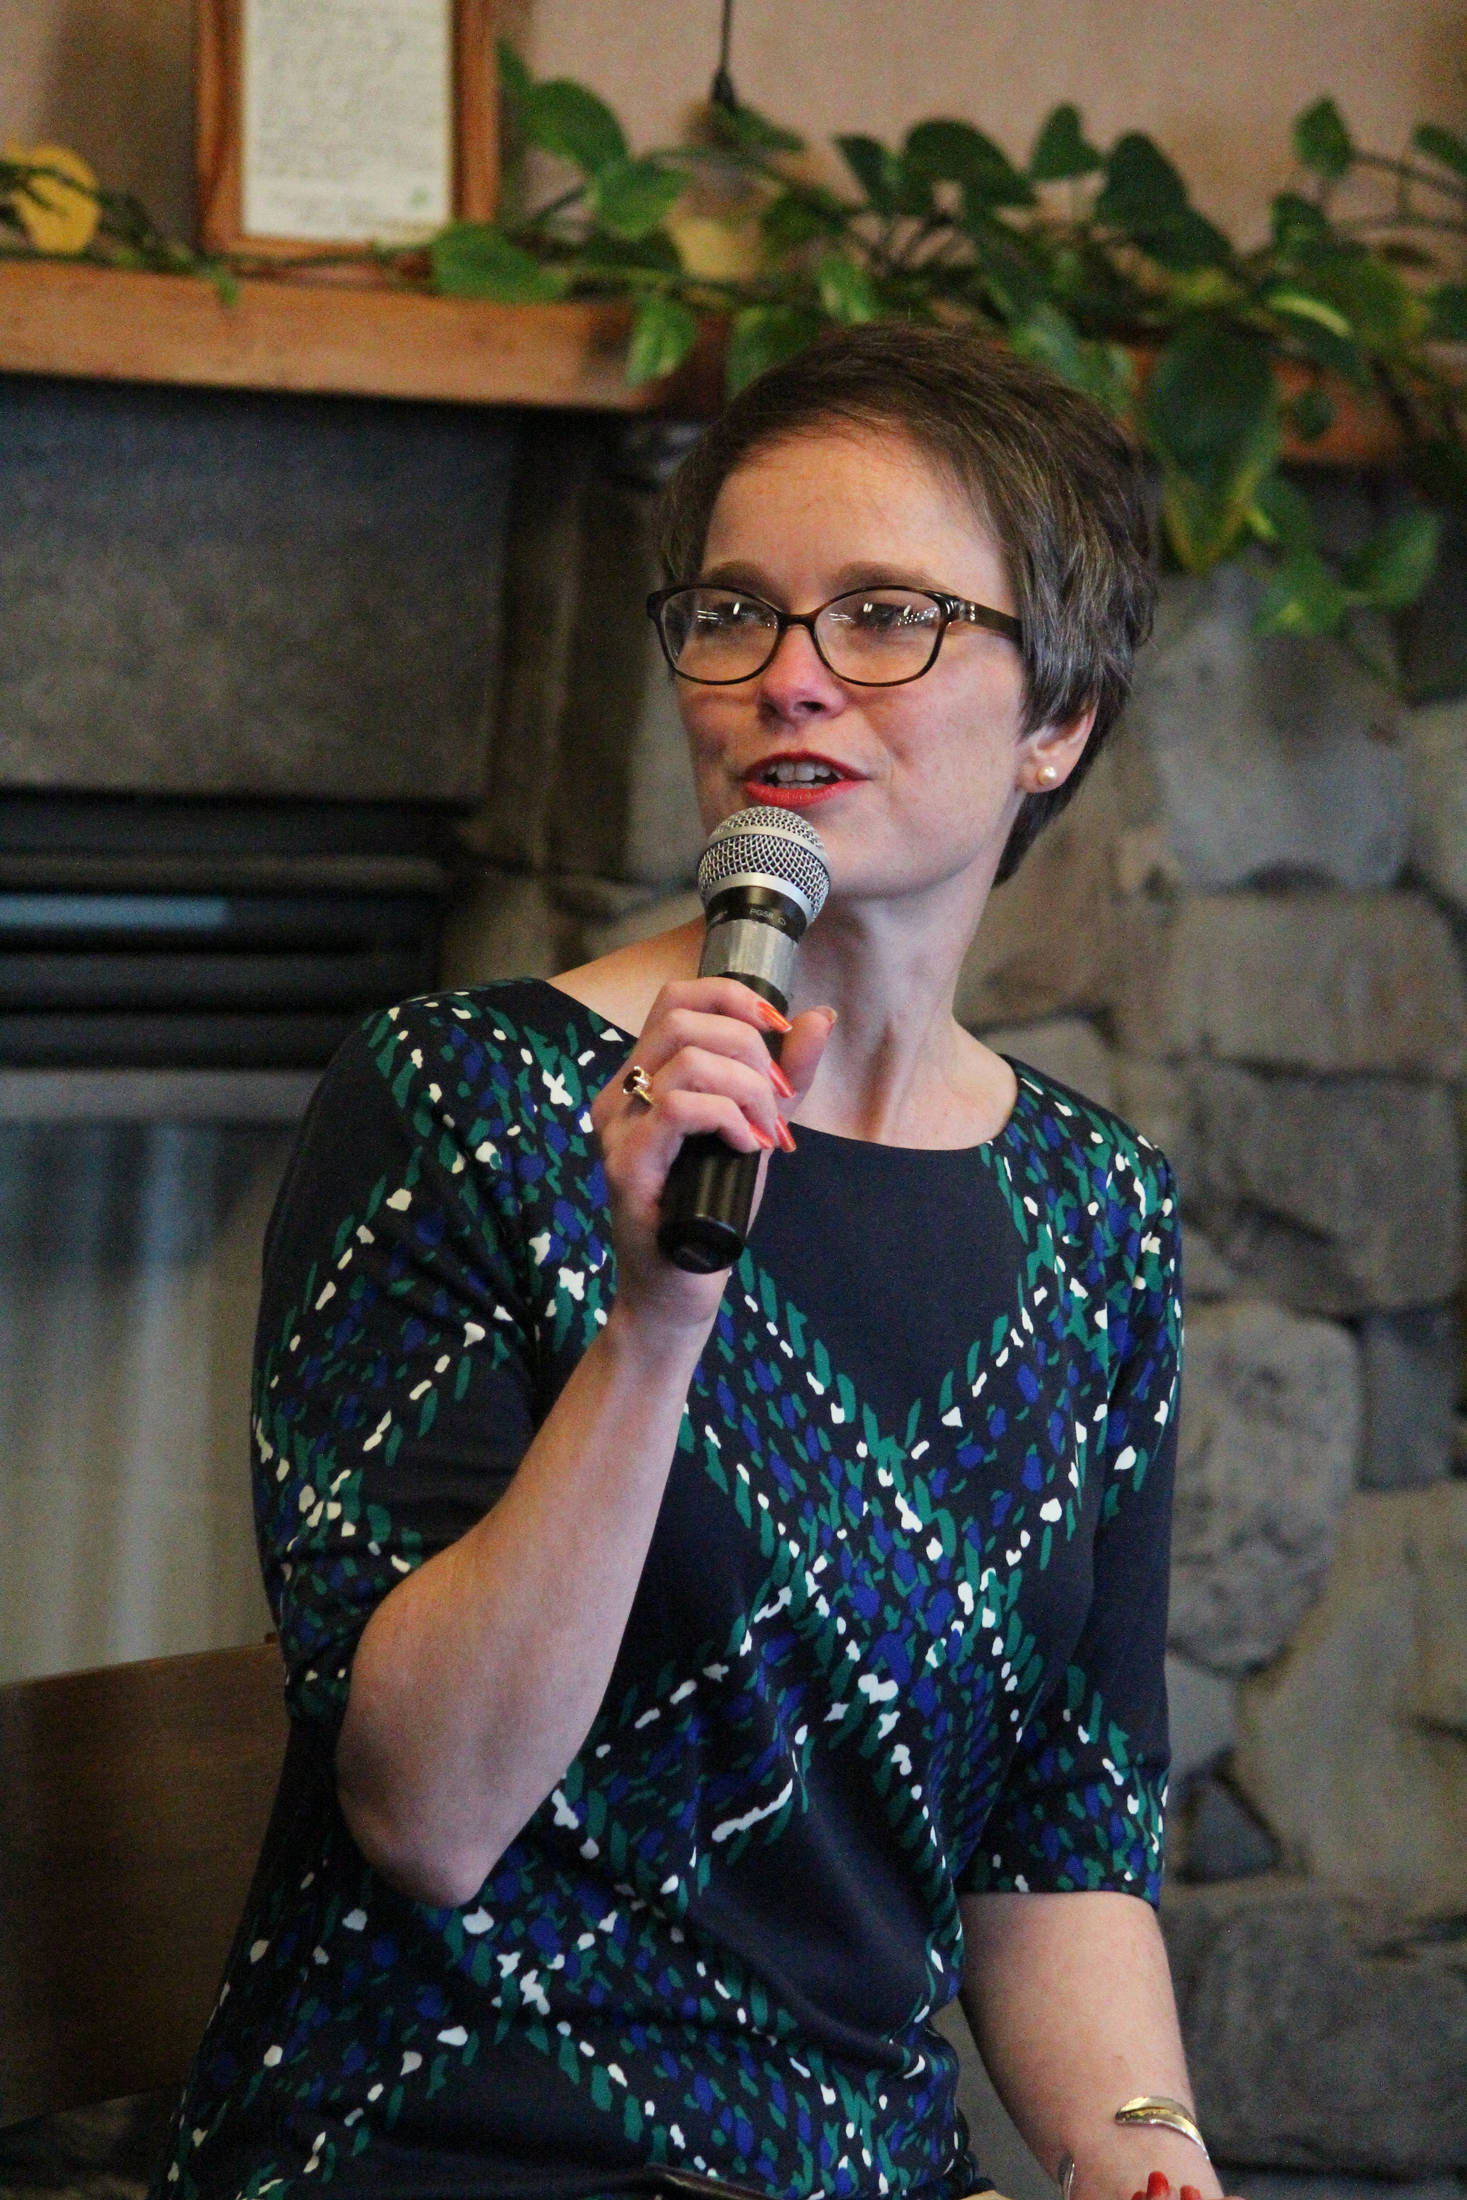 Sarah Vance, a Republican candidate for the Alaska House of Representatives District 31 seat, speaks at a candidate forum Saturday, Oct. 20, 2018 at the Homer Public Library in Homer, Alaska. Vance will face incumbent Rep. Paul Seaton in the November election. (Photo by Megan Pacer/Homer News)                                Sarah Vance, a Republican candidate for the Alaska House of Representatives District 31 seat, speaks at a candidate forum Saturday, Oct. 20, 2018 at the Homer Public Library in Homer, Alaska. Vance will face incumbent Rep. Paul Seaton in the November election. (Photo by Megan Pacer/Homer News)